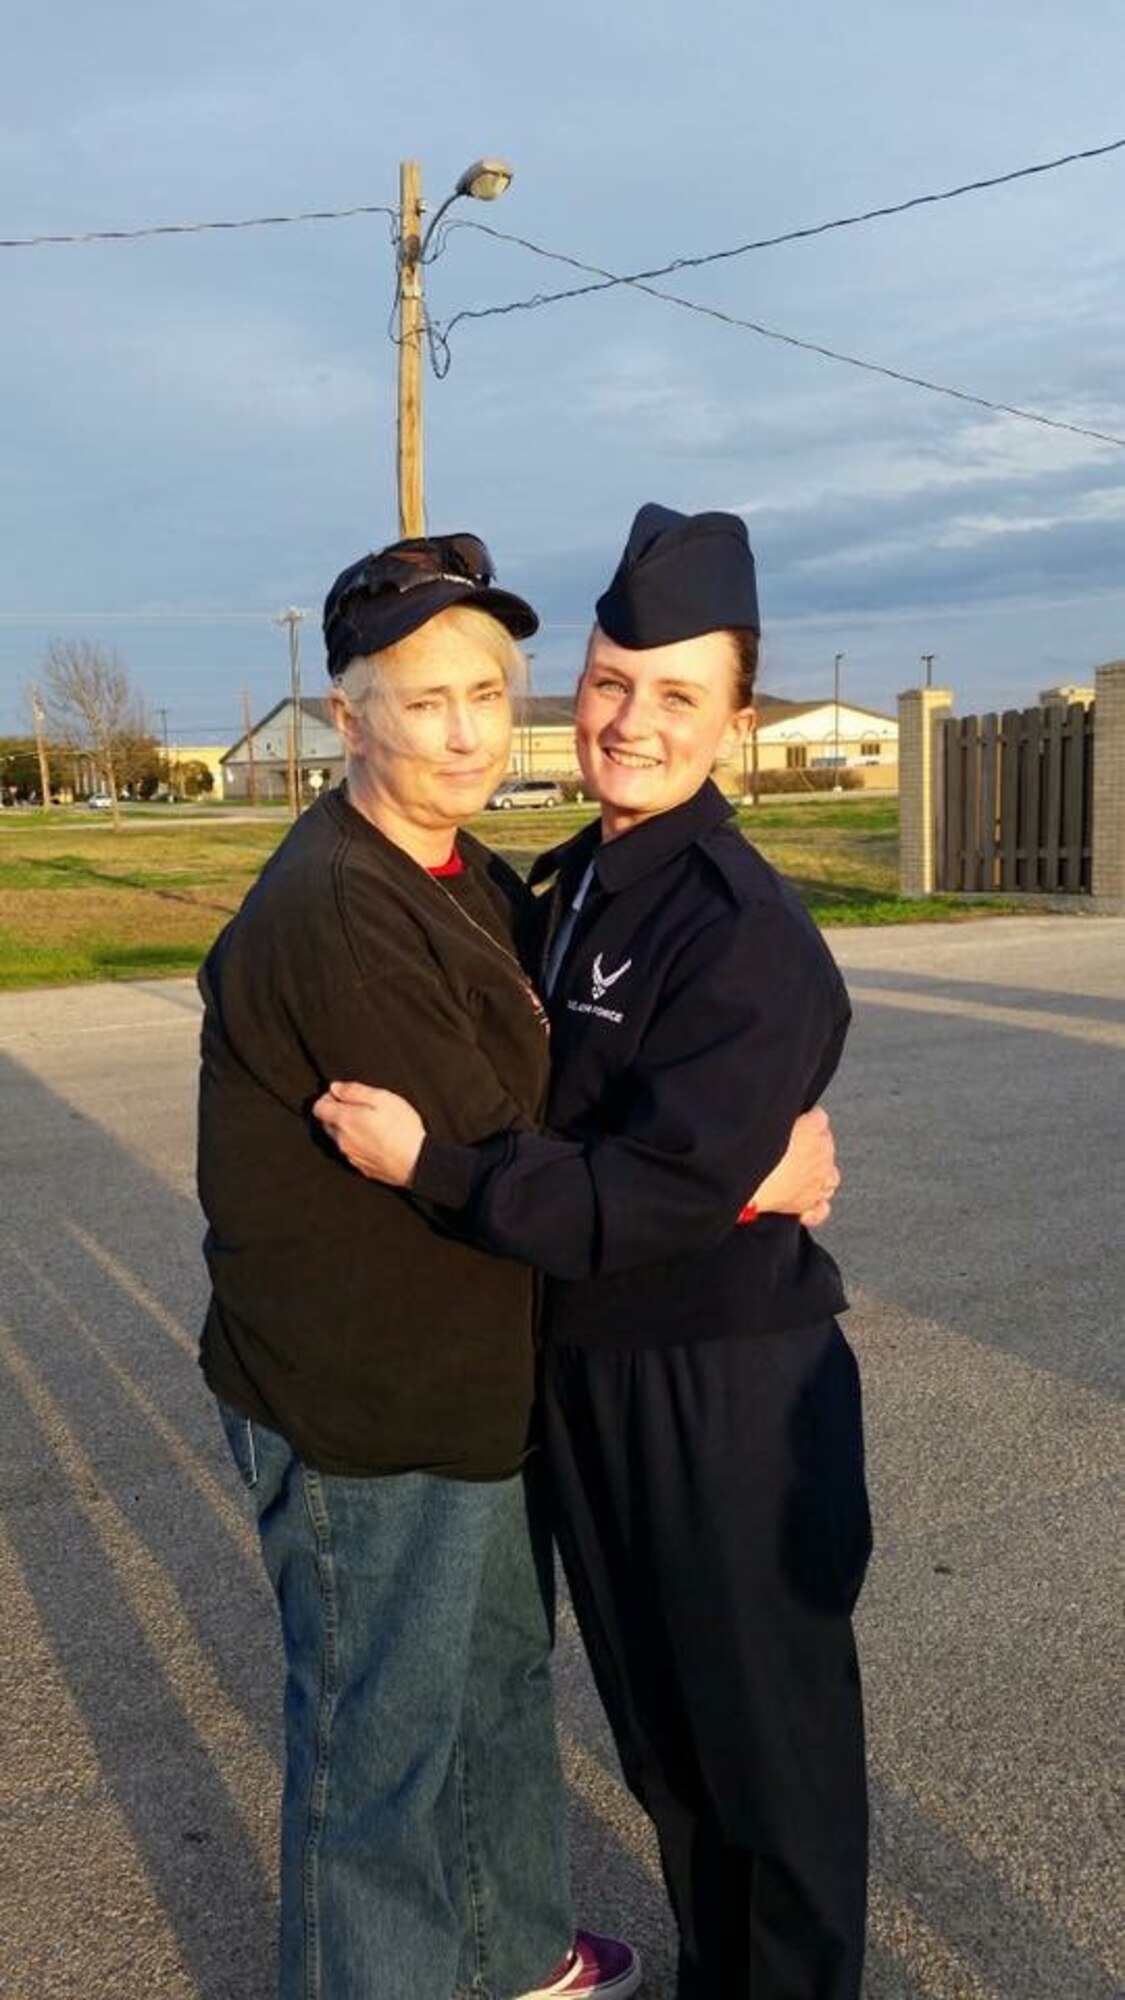 Mary Nevins (left) hugs her daughter, Denise, after her graduation from Air Force basic training at Lackland Air Force Base, Texas, Jan. 30, 2015. Mary’s daughter, now Senior Airman Denise Jenson, currently works for the 28th Bomb Wing Public Affairs office at Ellsworth Air Force Base, S.D. (Courtesy photo)